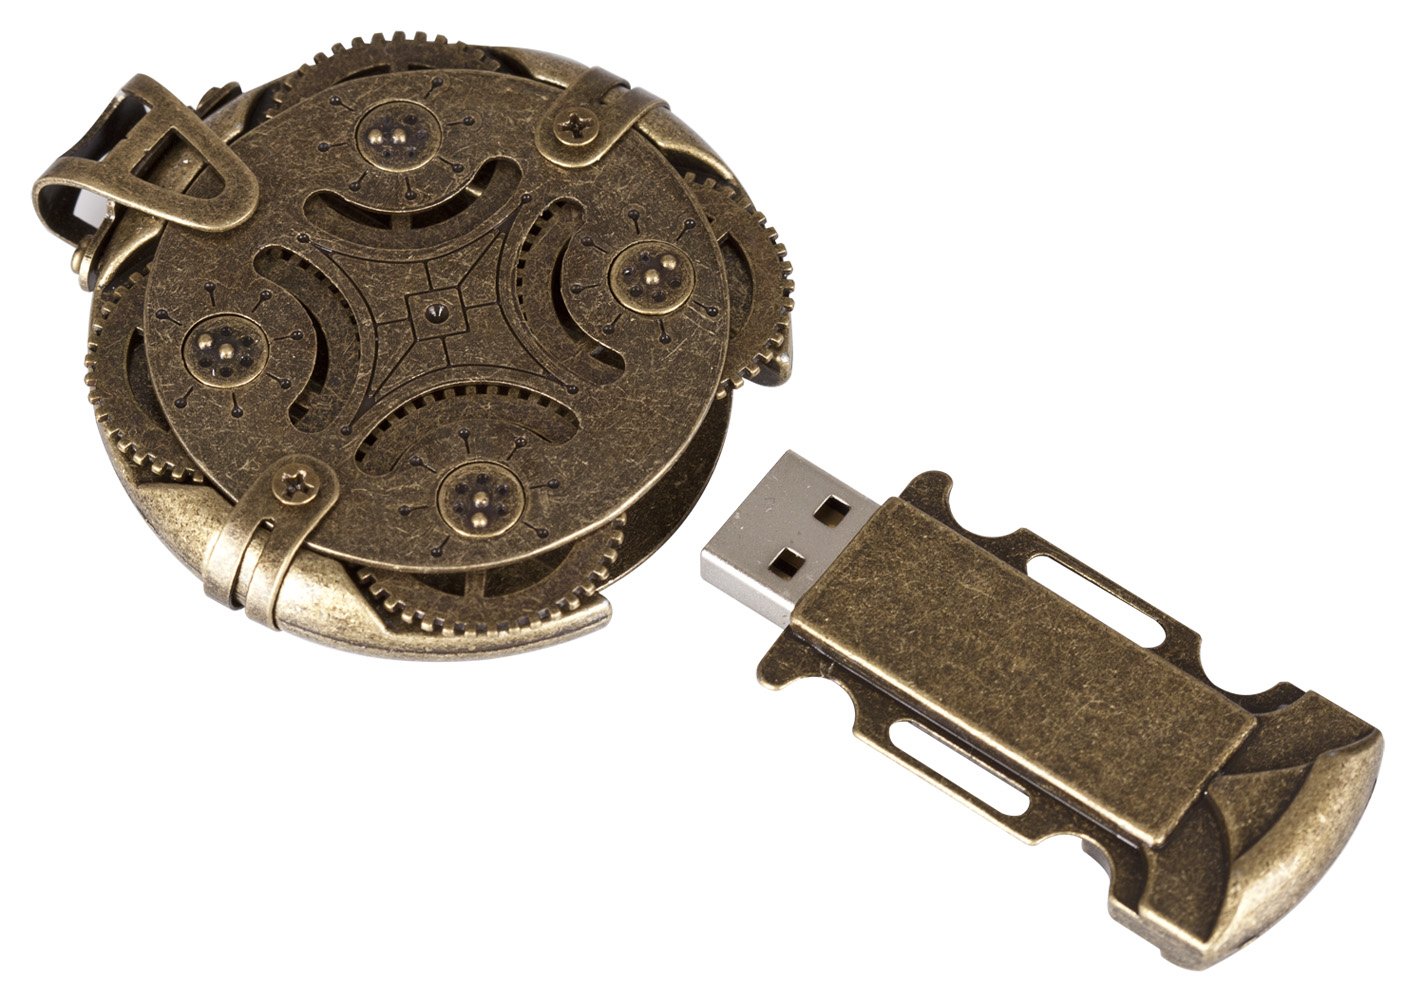 USB drive with a lock icon